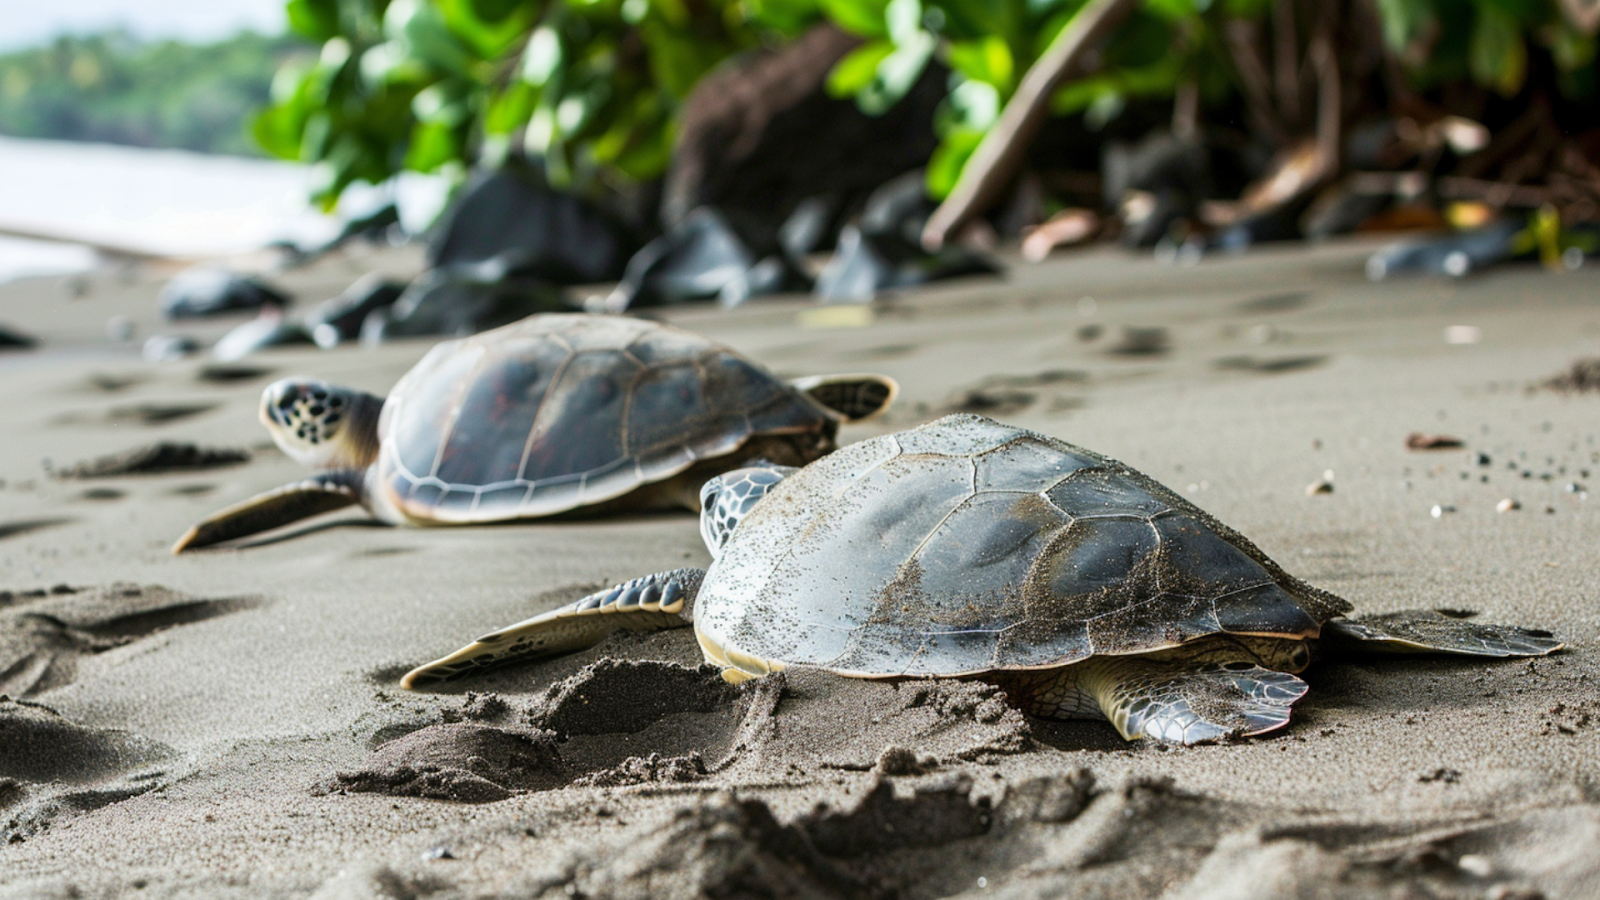 Sea turtles on the sand of Tortuguero National Park in Costa Rica